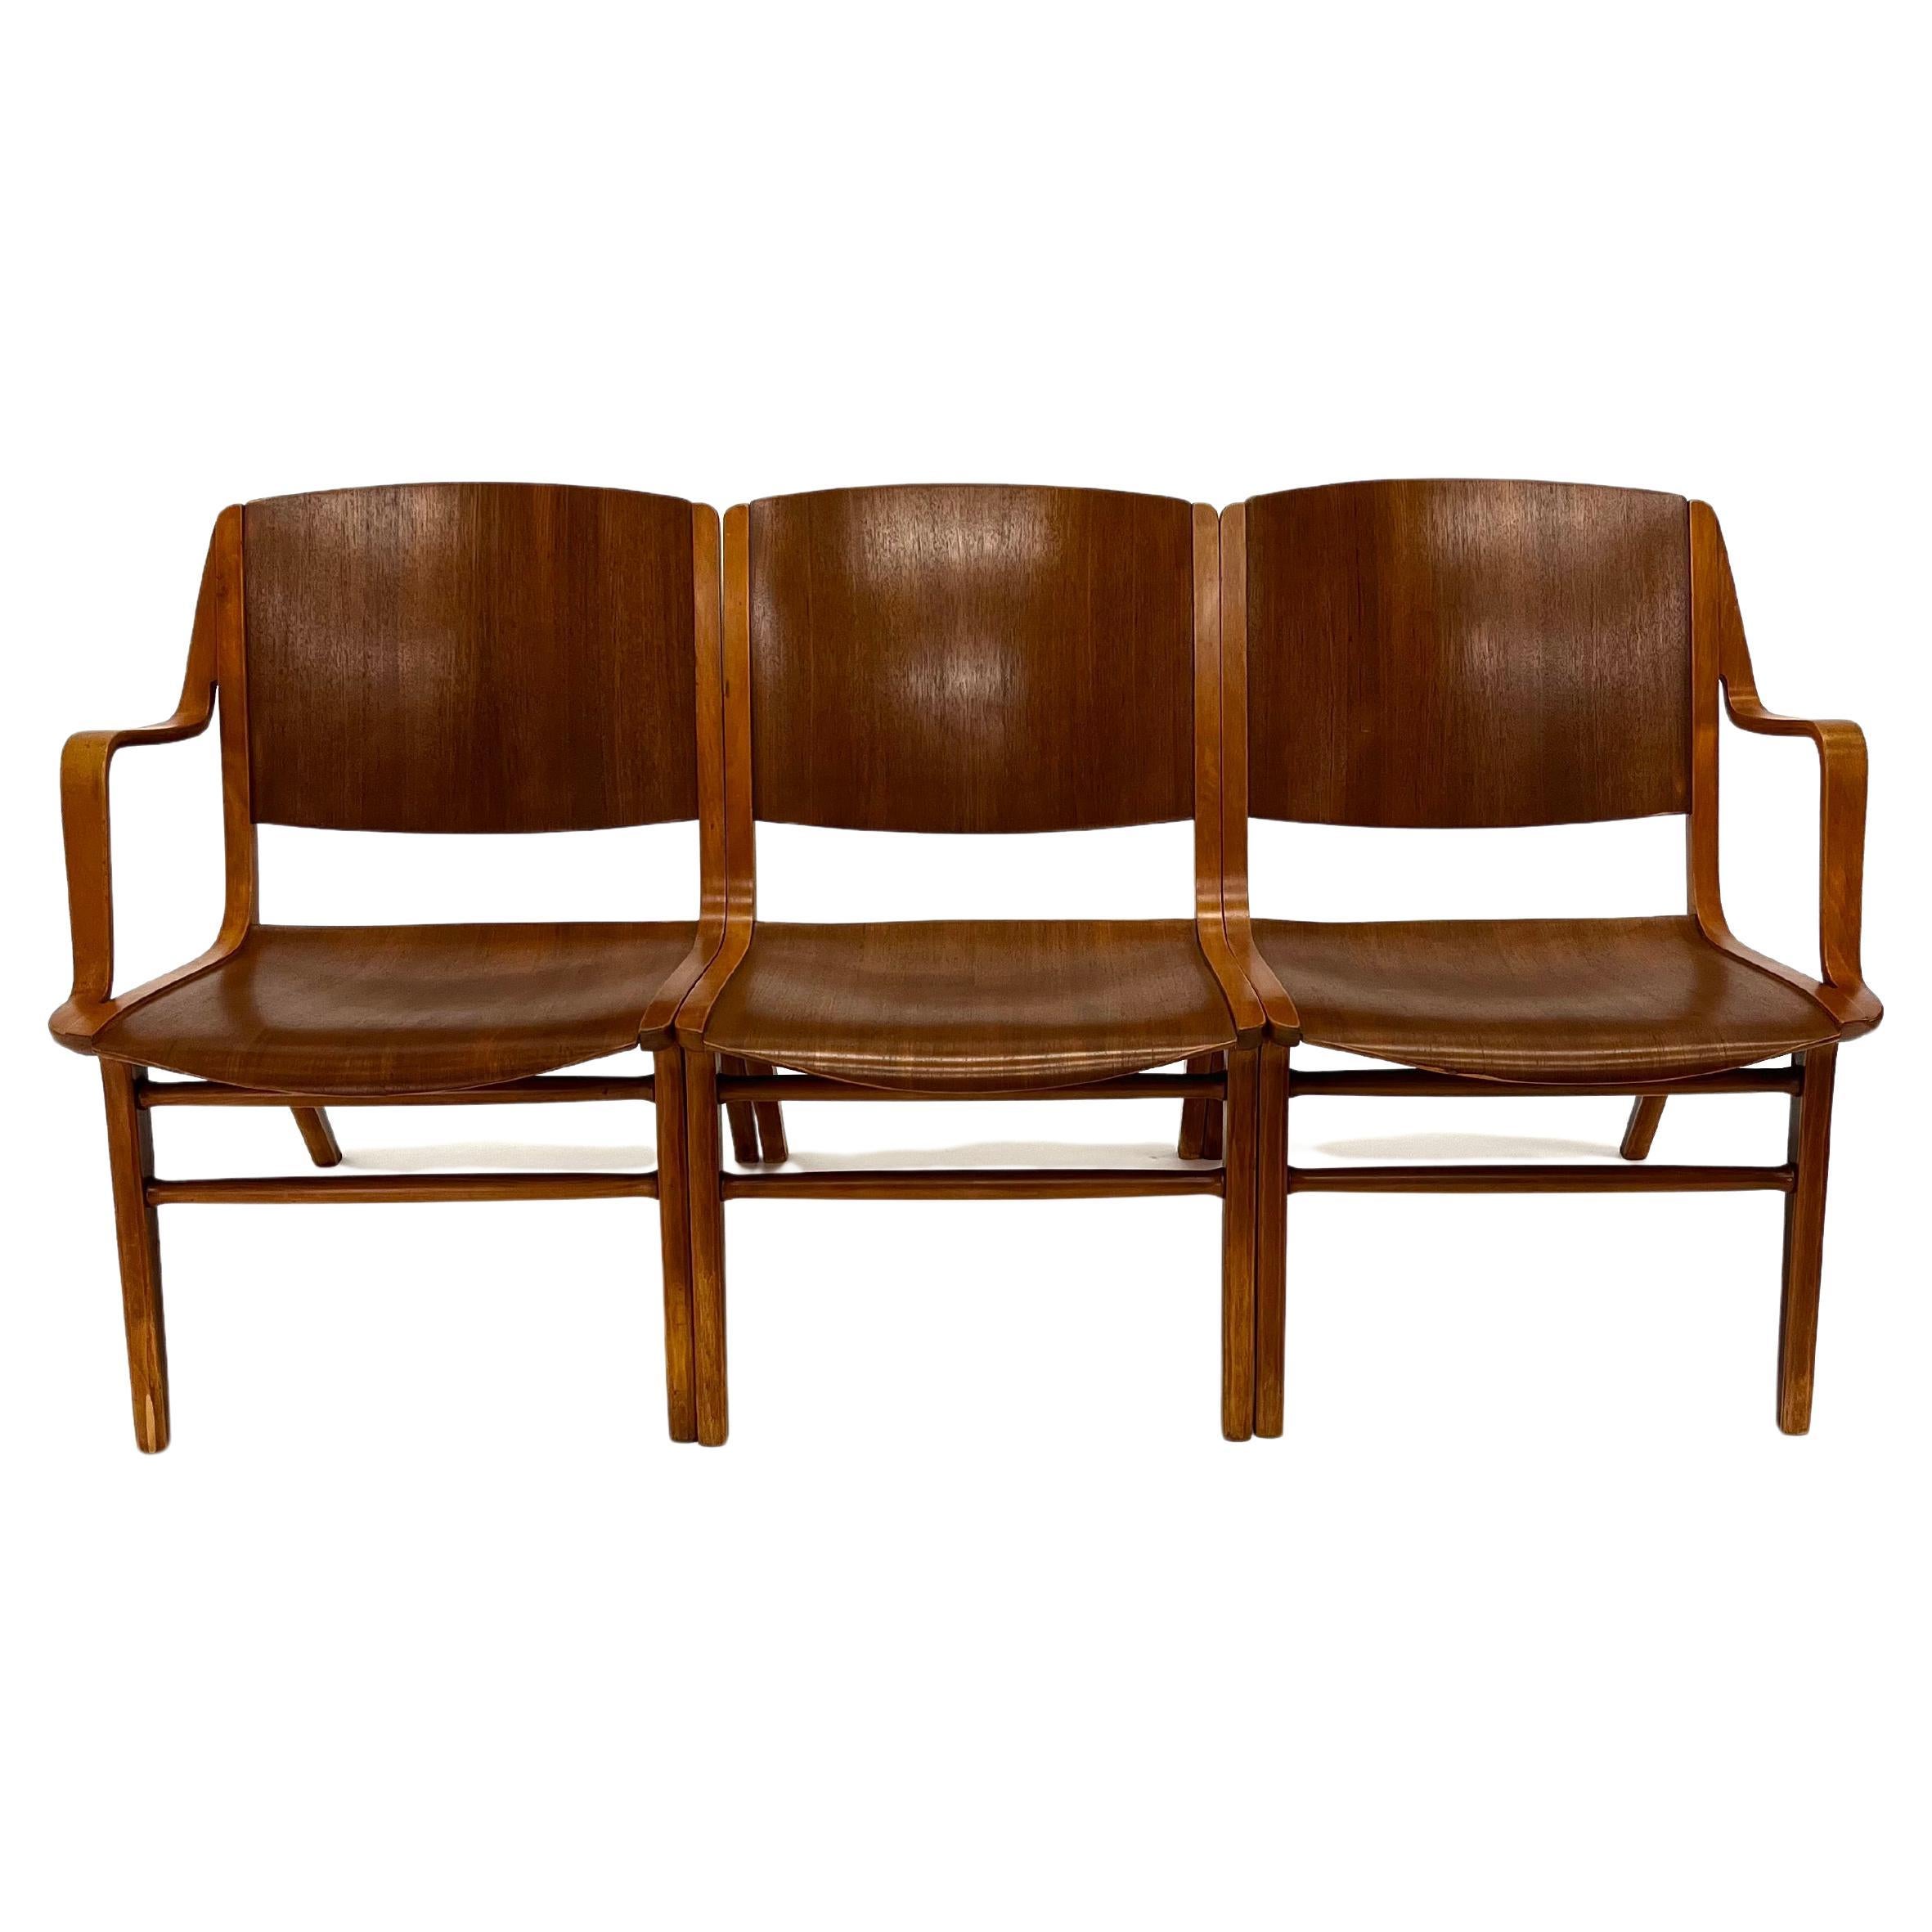 Peter Hvidt and Orla Molgaard Mahogany and Birch Three Part Bench. Can be used in various configuration as two chairs with one arm, a single side chair, or a two-seat bench as well as a three-seat bench.

Each chair features a molded curved back